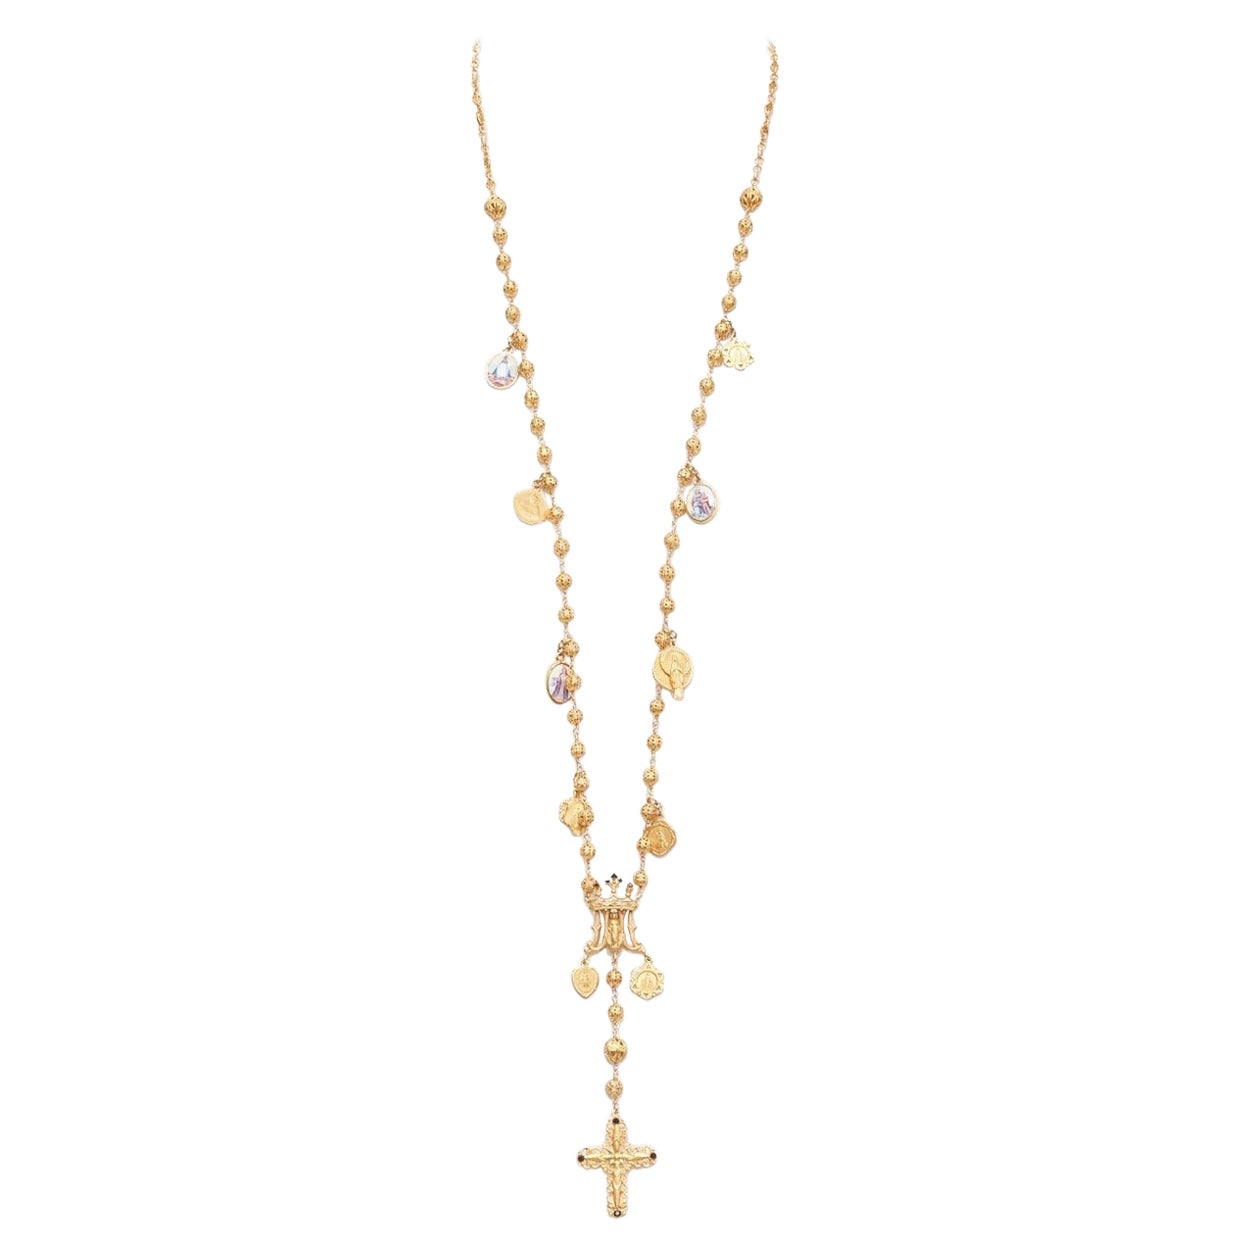 DOLCE GABBANA gold tone Jesus cross Saints coin charm long rosary necklace For Sale